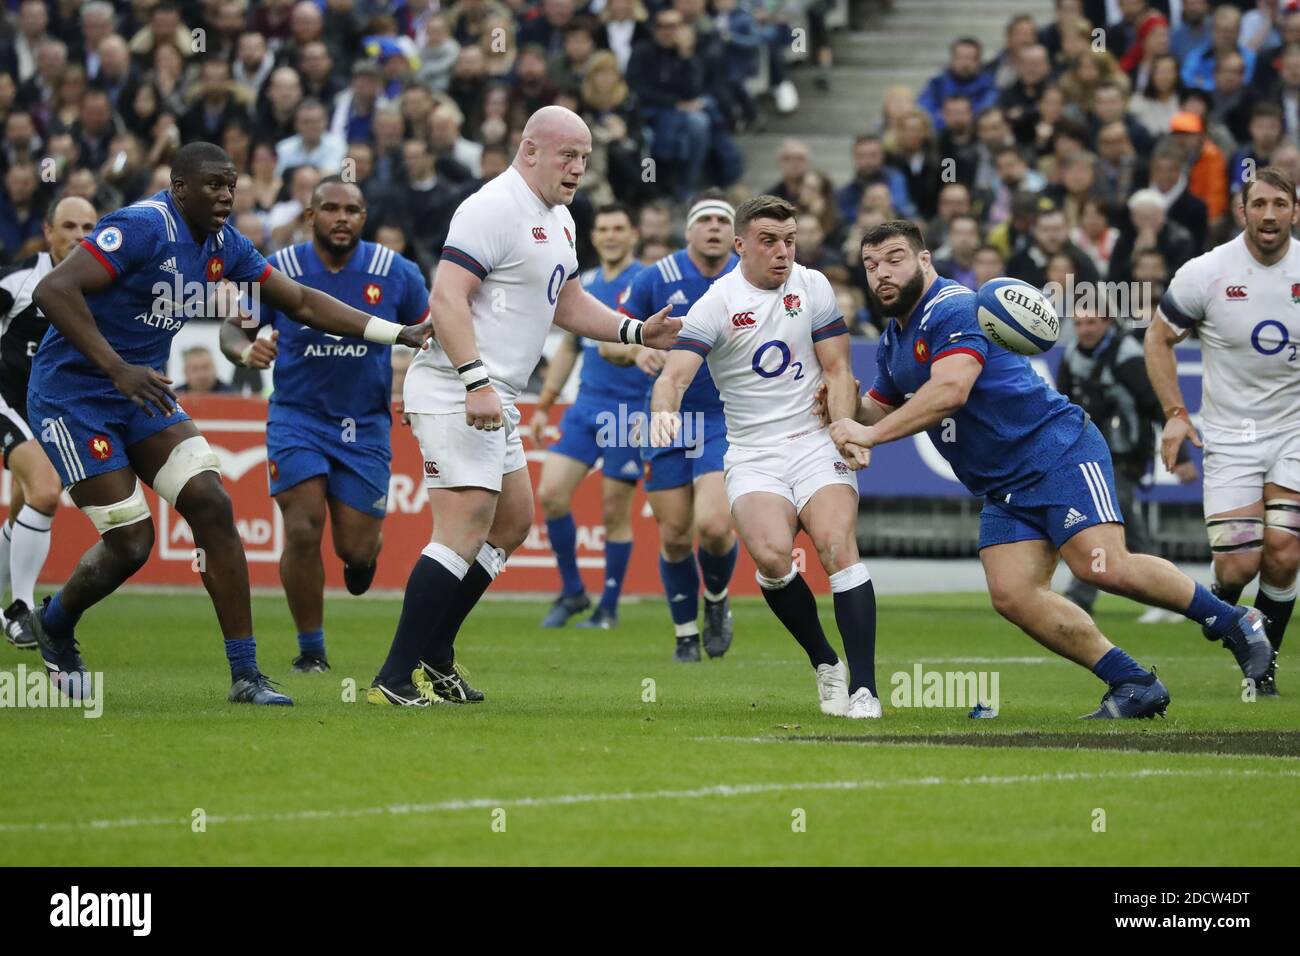 France's Rabah Slimani battles England's Dan Cole and George Ford during  Rugby Natwest 6 Nations Tournament, France vs England in Stade de France,  St-Denis, France, on March 10th, 2018. France won 22-16.